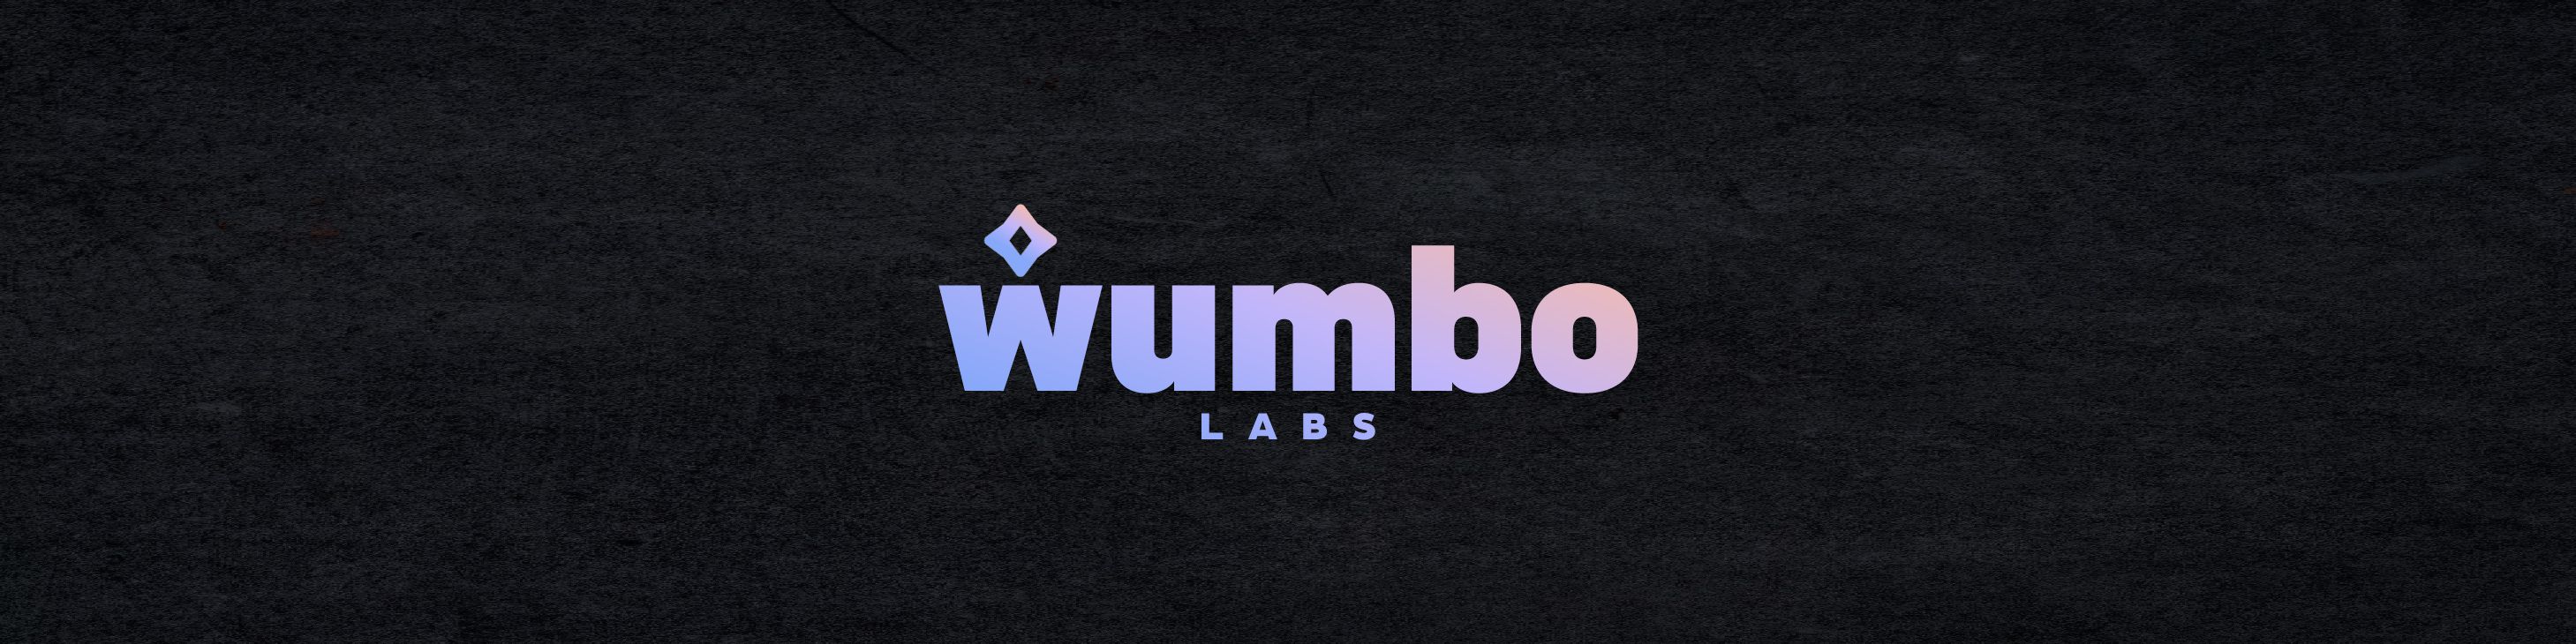 WumboLabs バナー